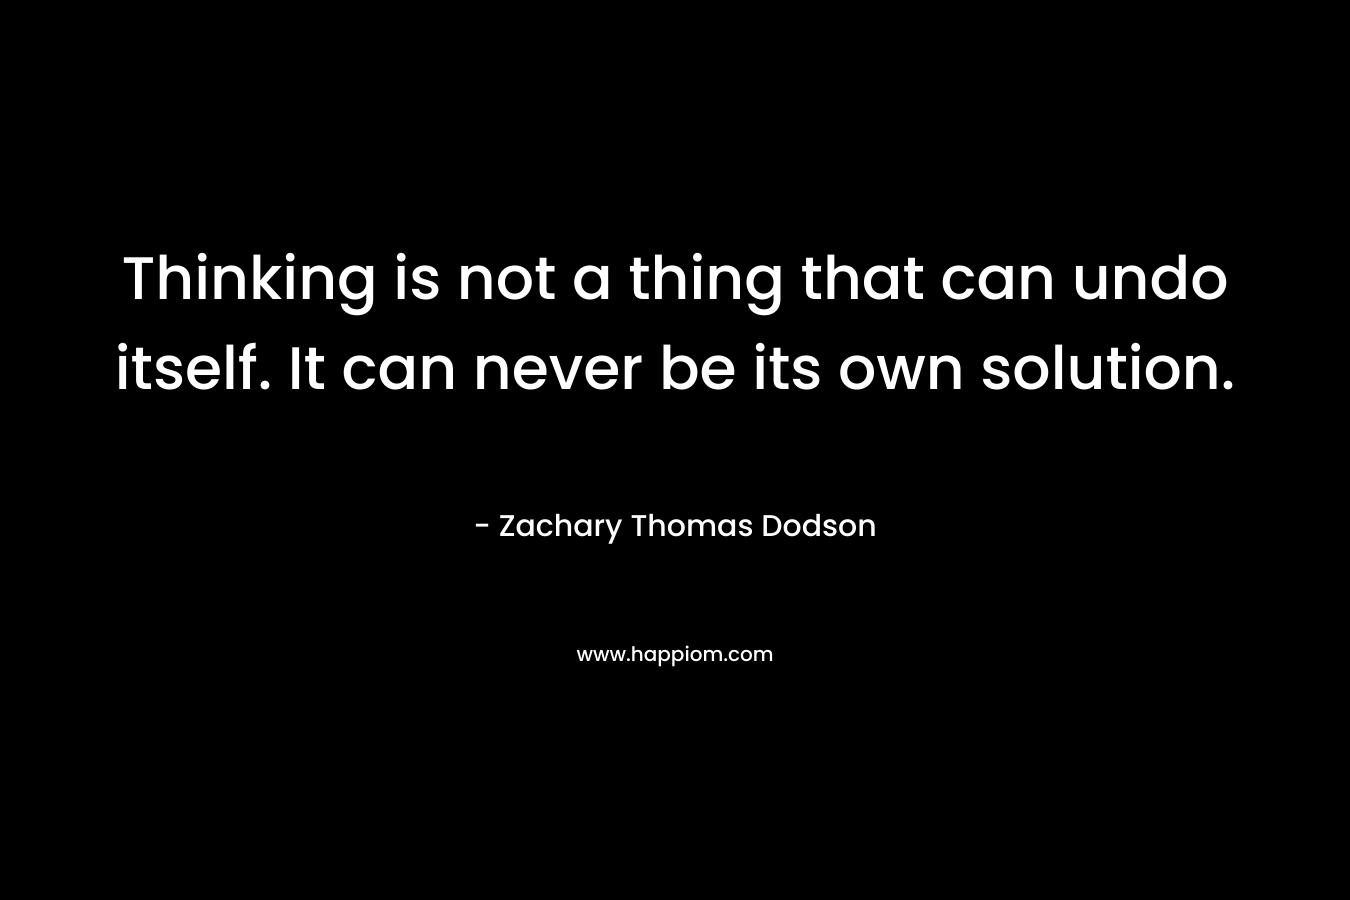 Thinking is not a thing that can undo itself. It can never be its own solution.